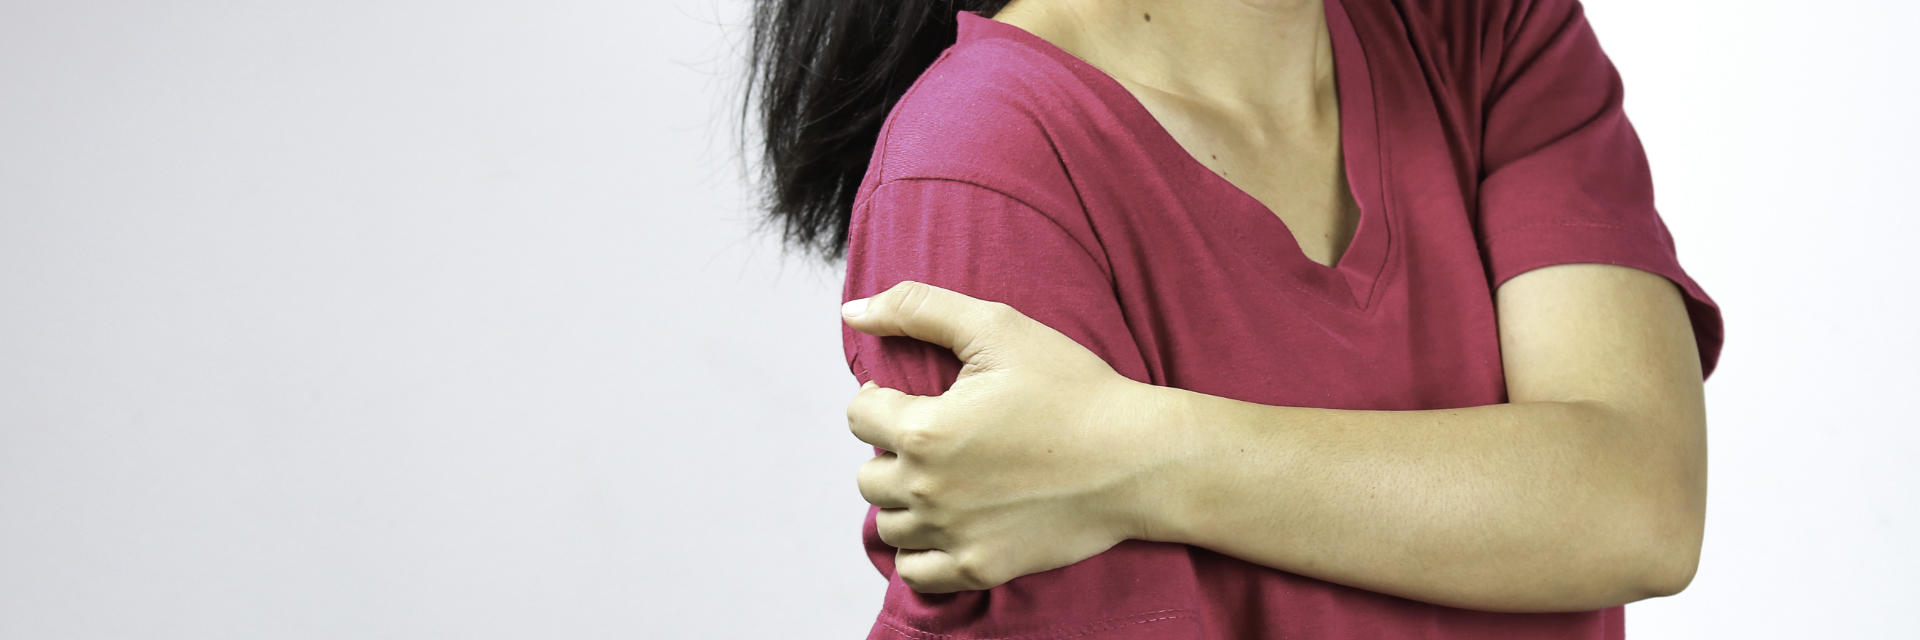 Woman suffering from shoulder pain due to bursitis.